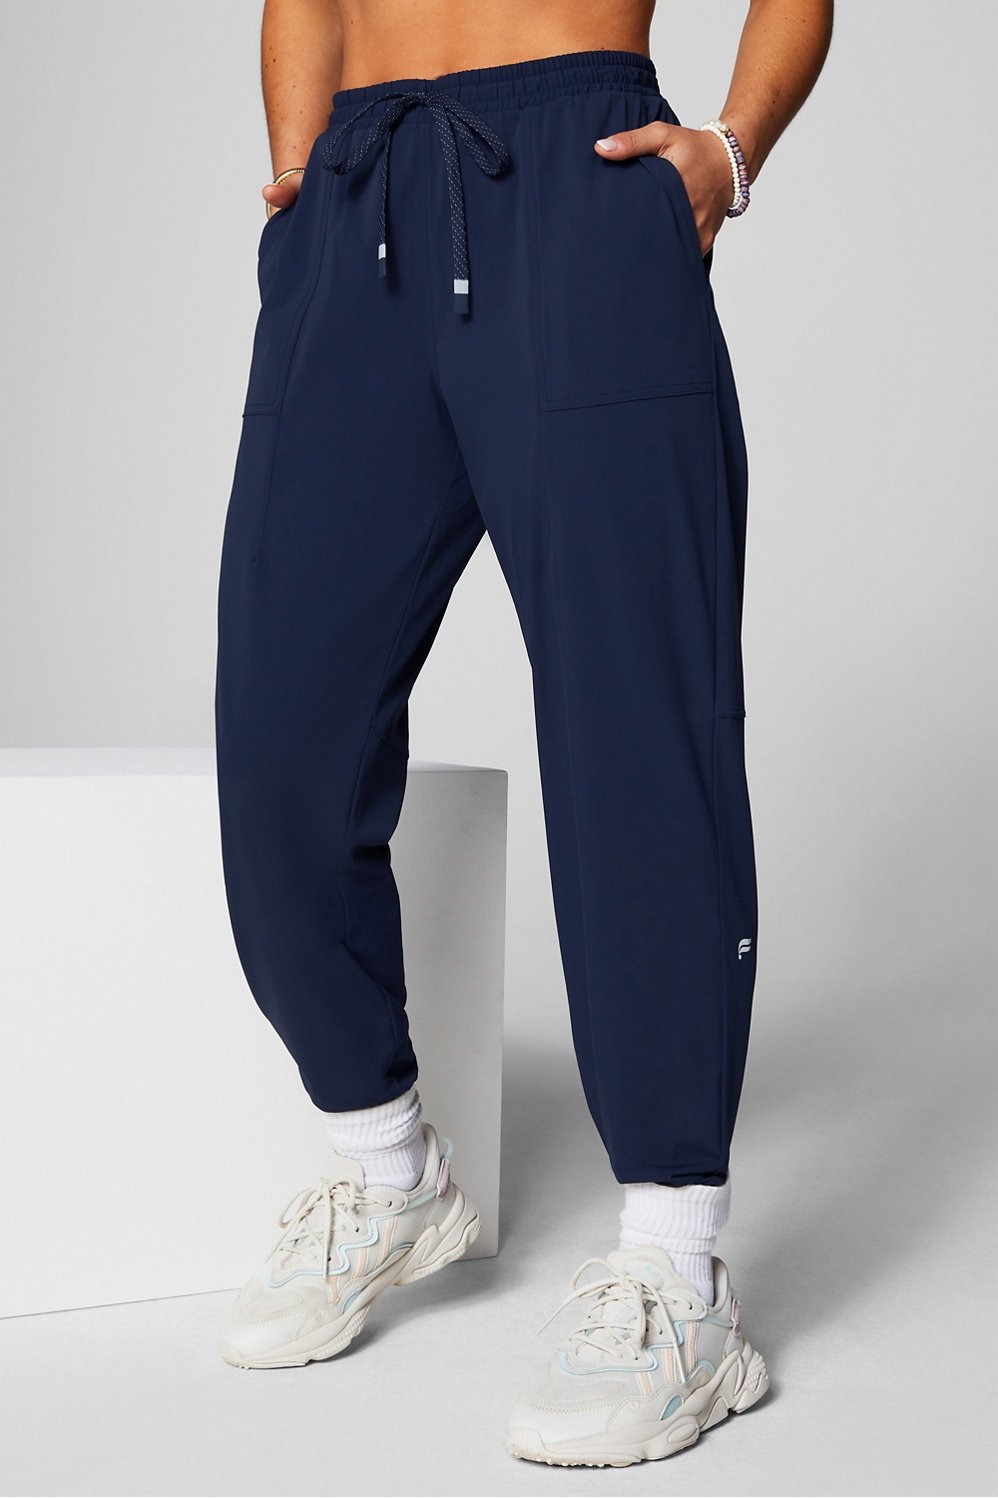 The One Jogger - Women's